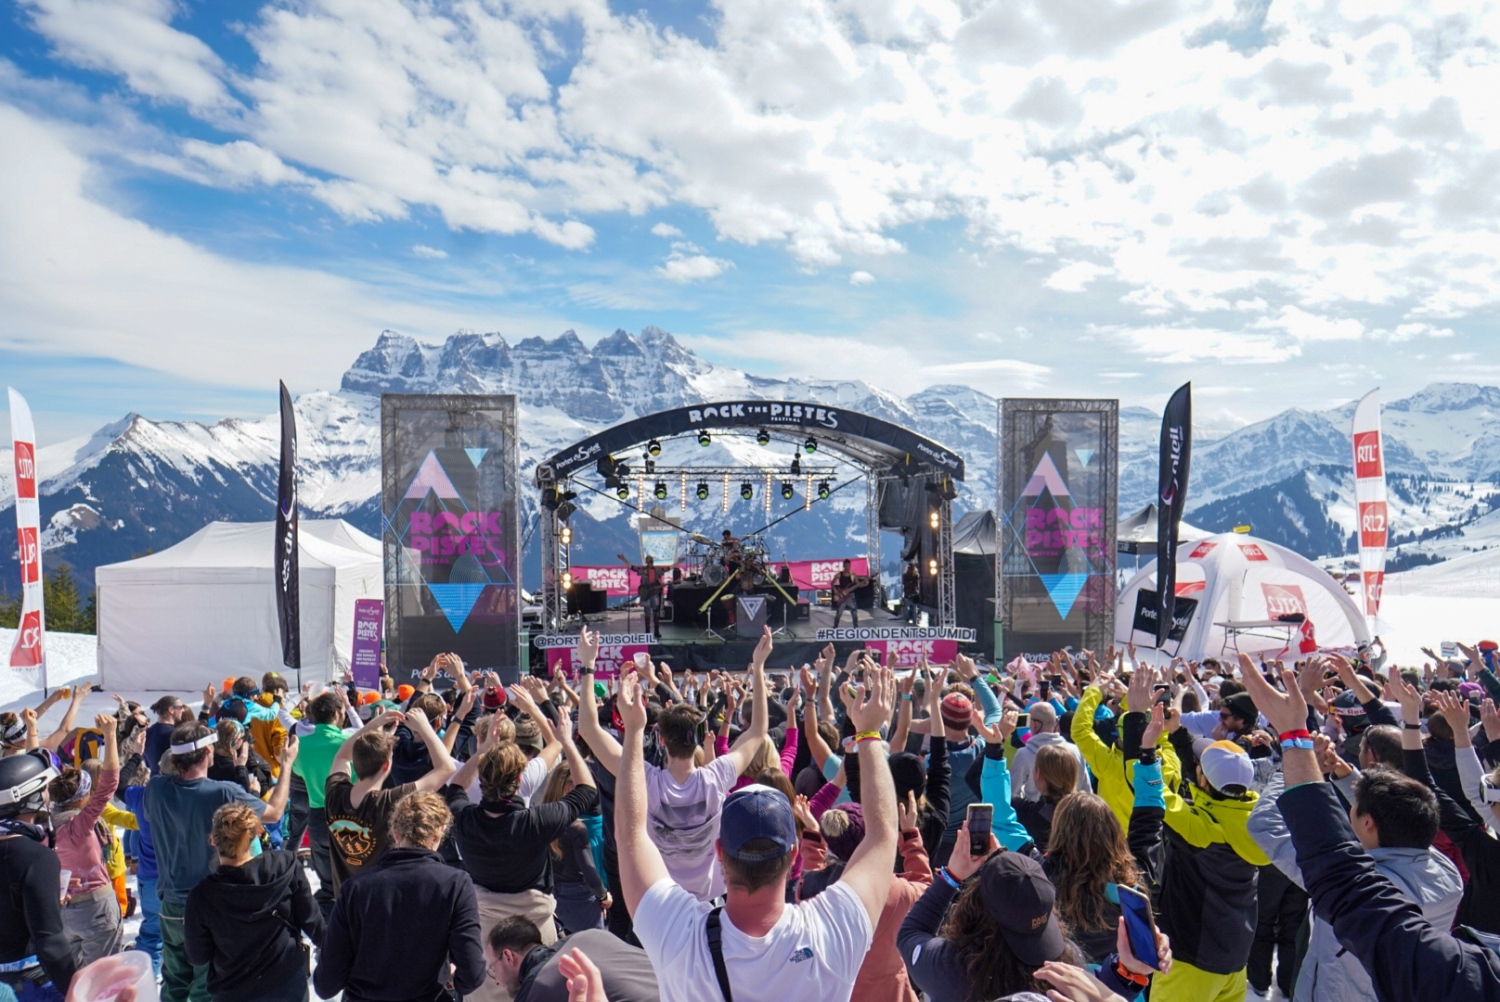 Crowds dancing to performers on stage with snowy mountains in background_Rock The Pistes Festival Review